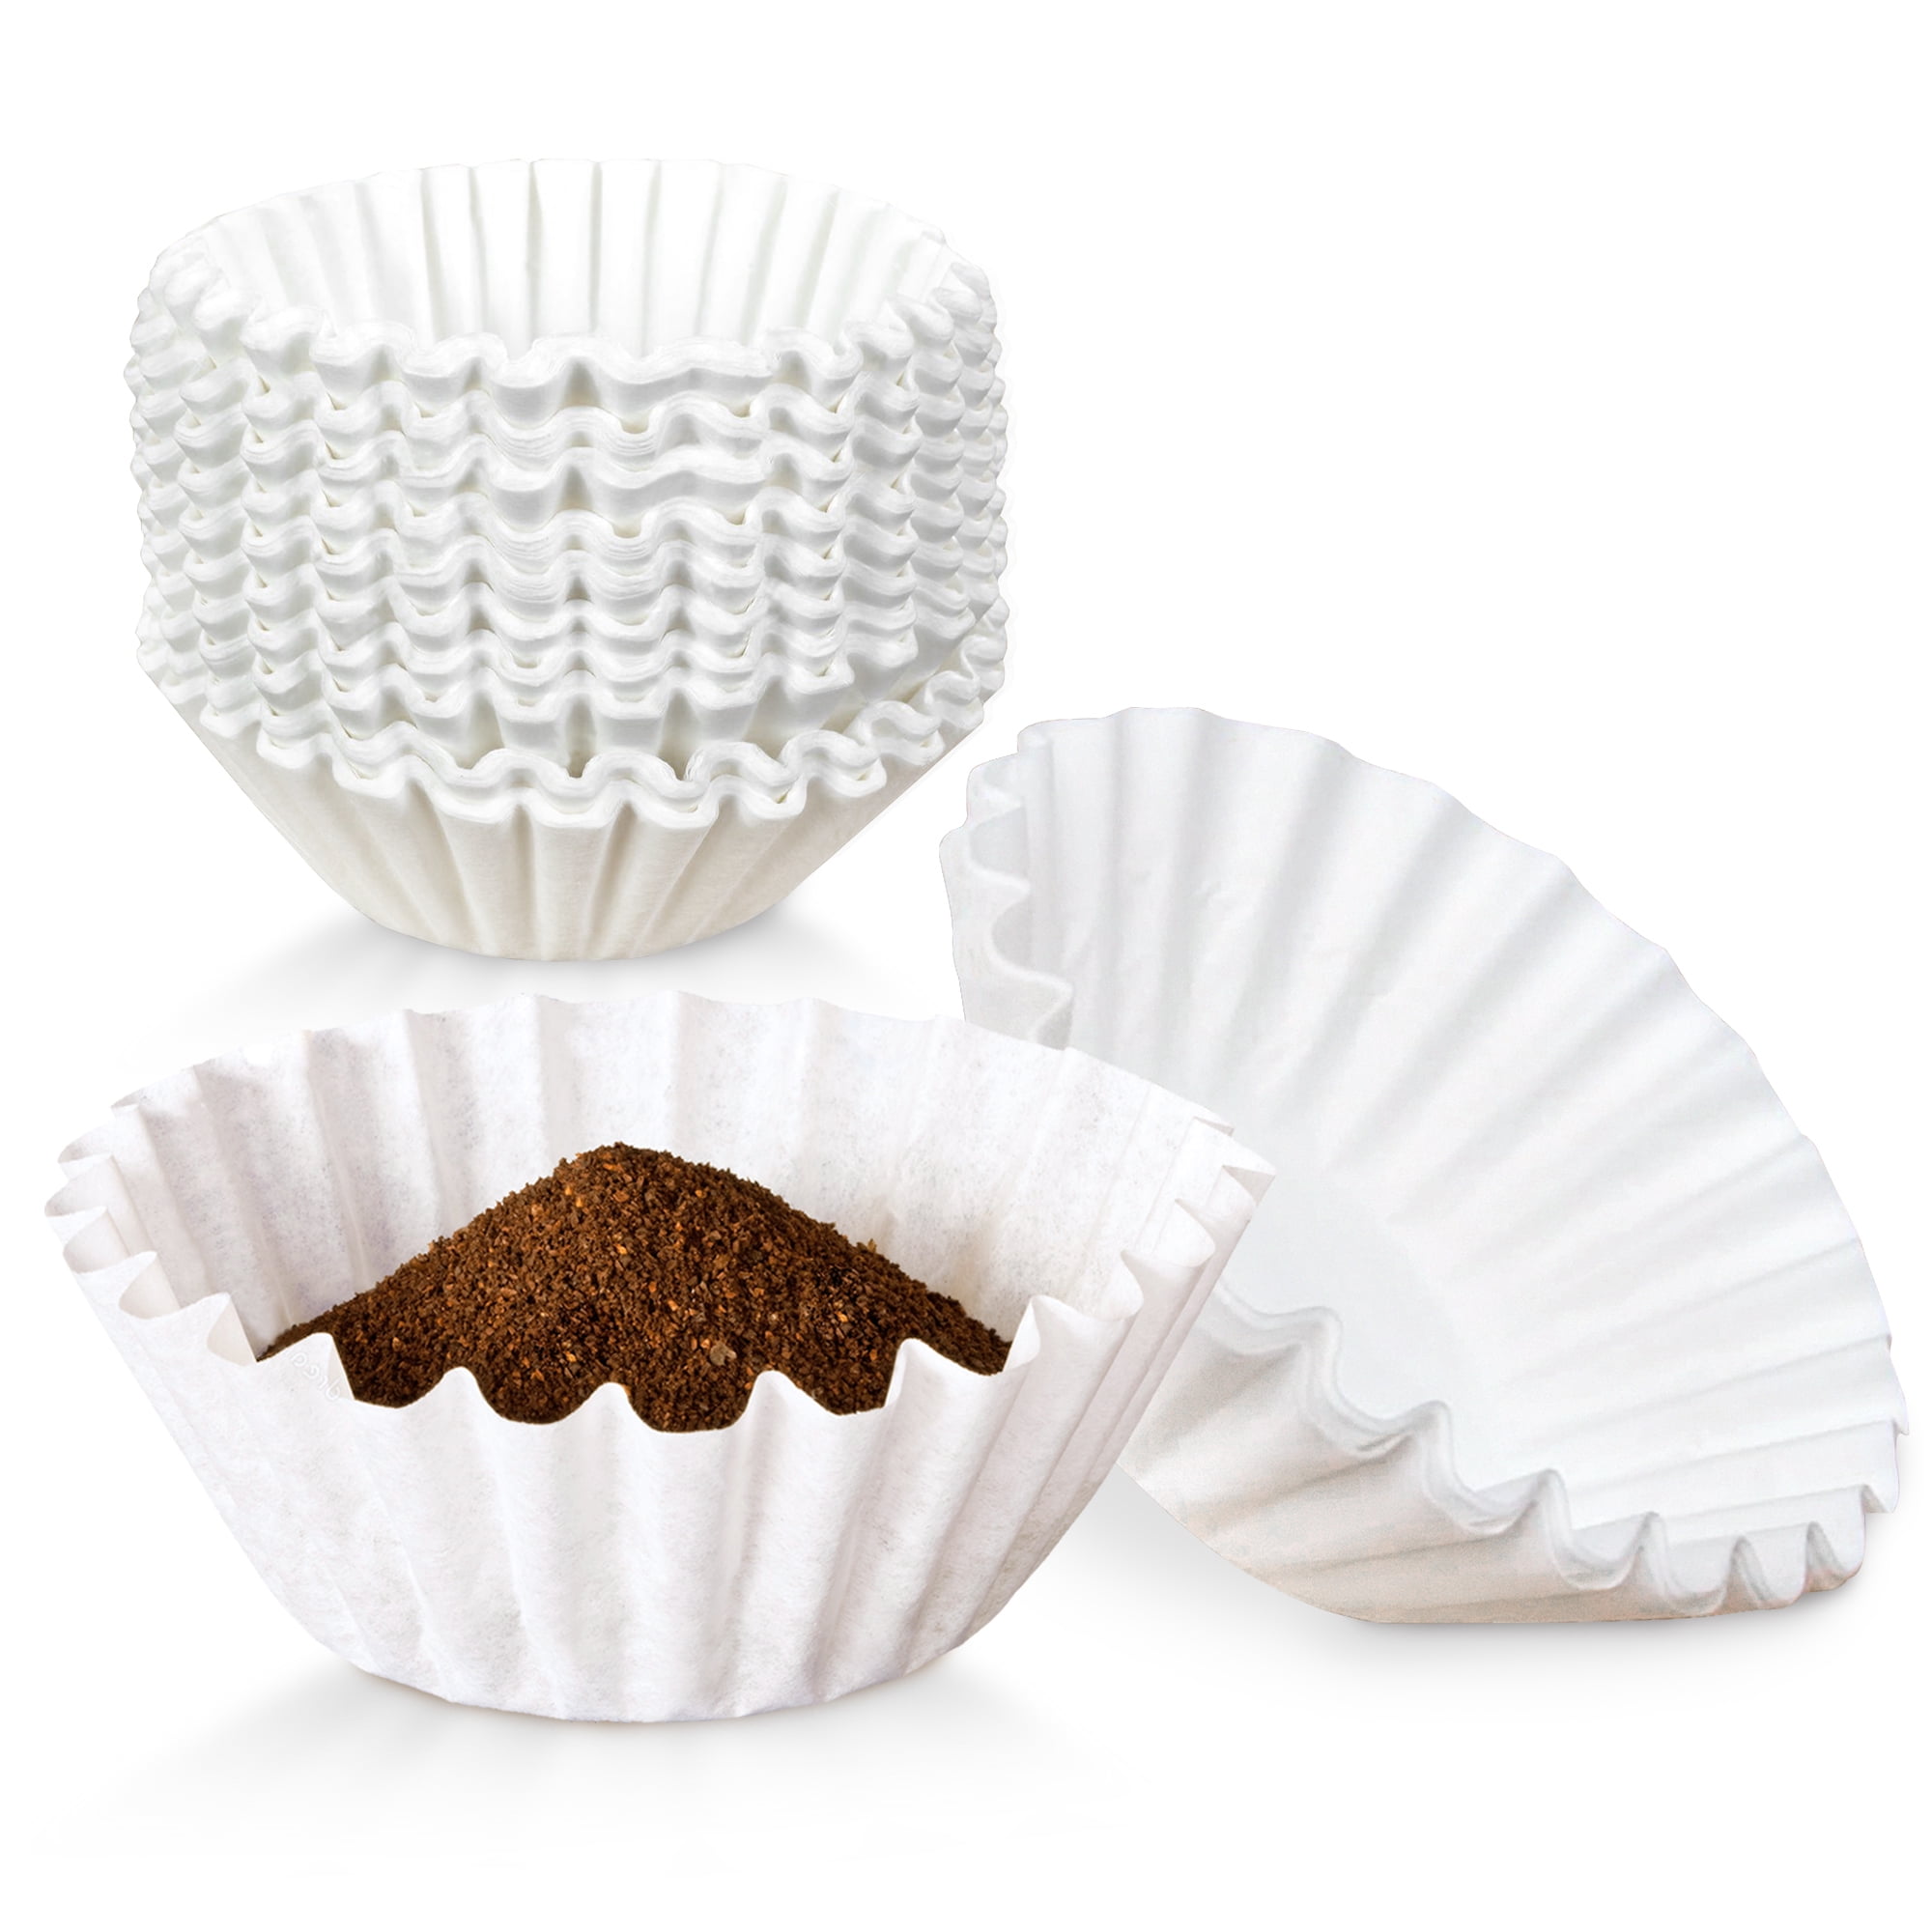 Bunn Coffee Filters Commercial 12 Cup 500 count 20115.0000 New White 